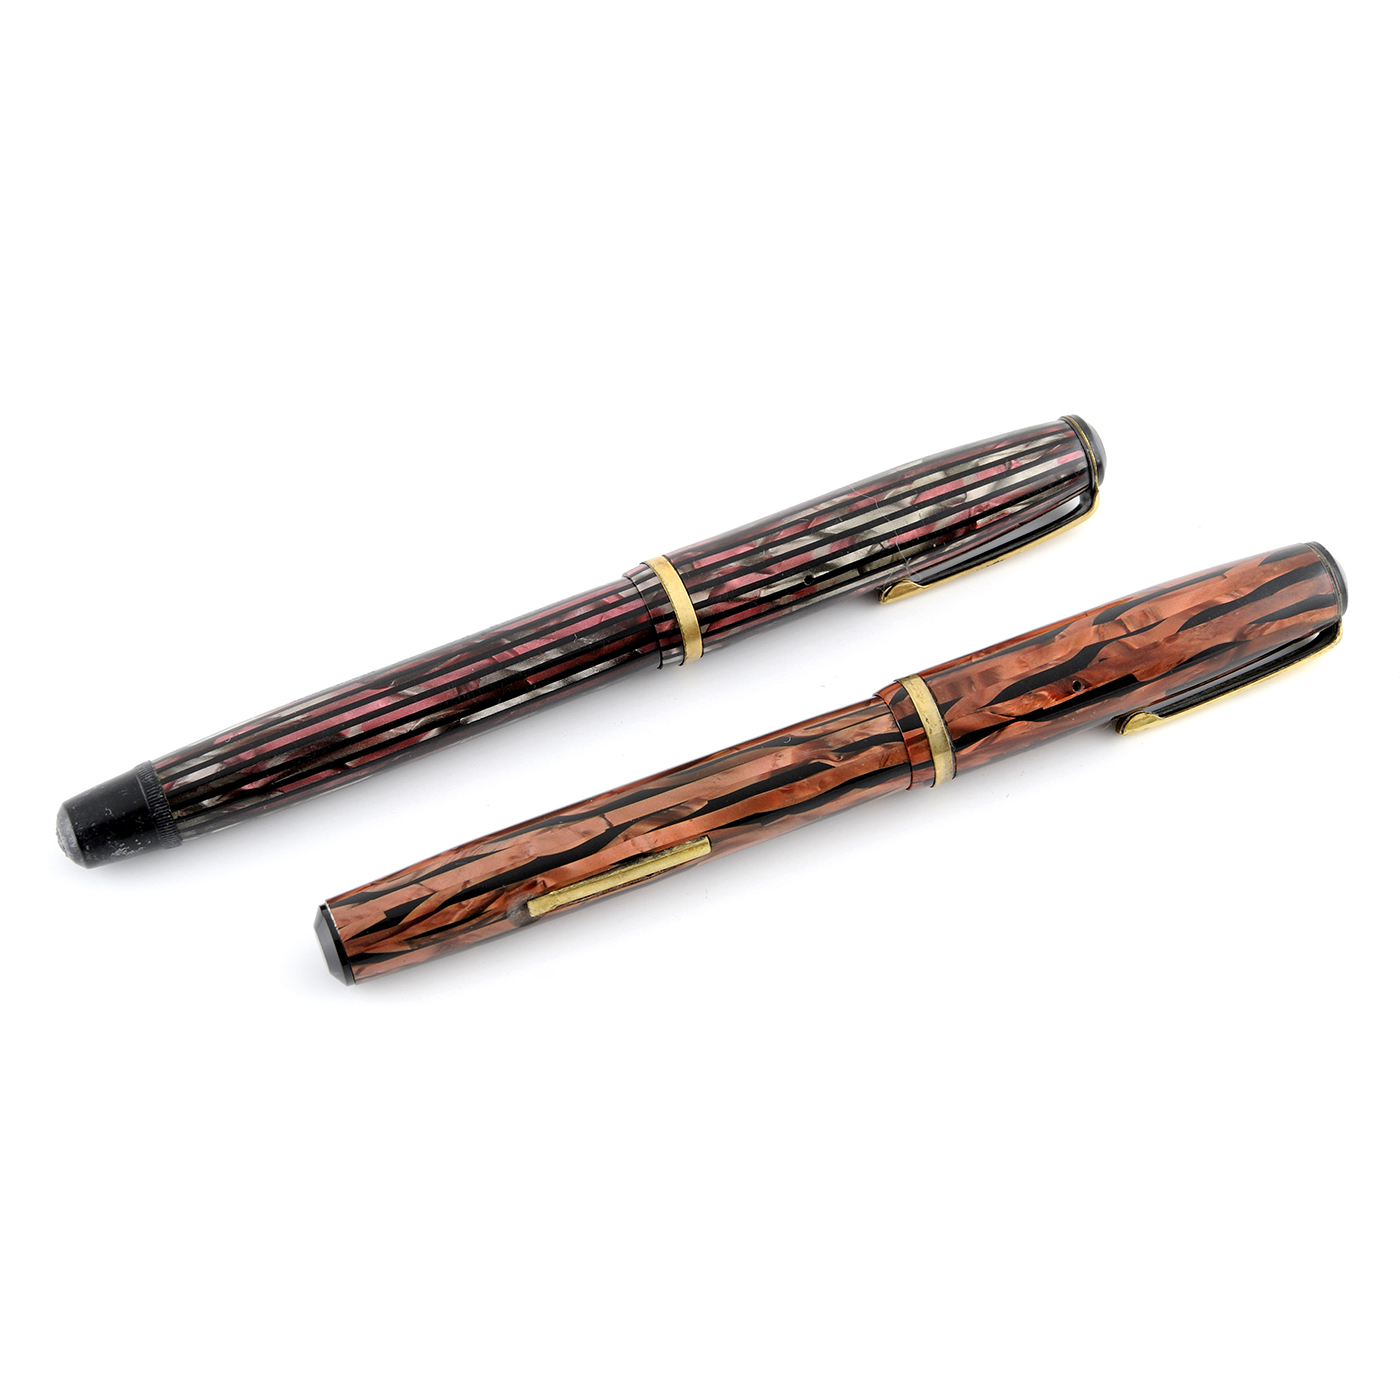 Set of 2 old fountain pens, WEAREVER brand.